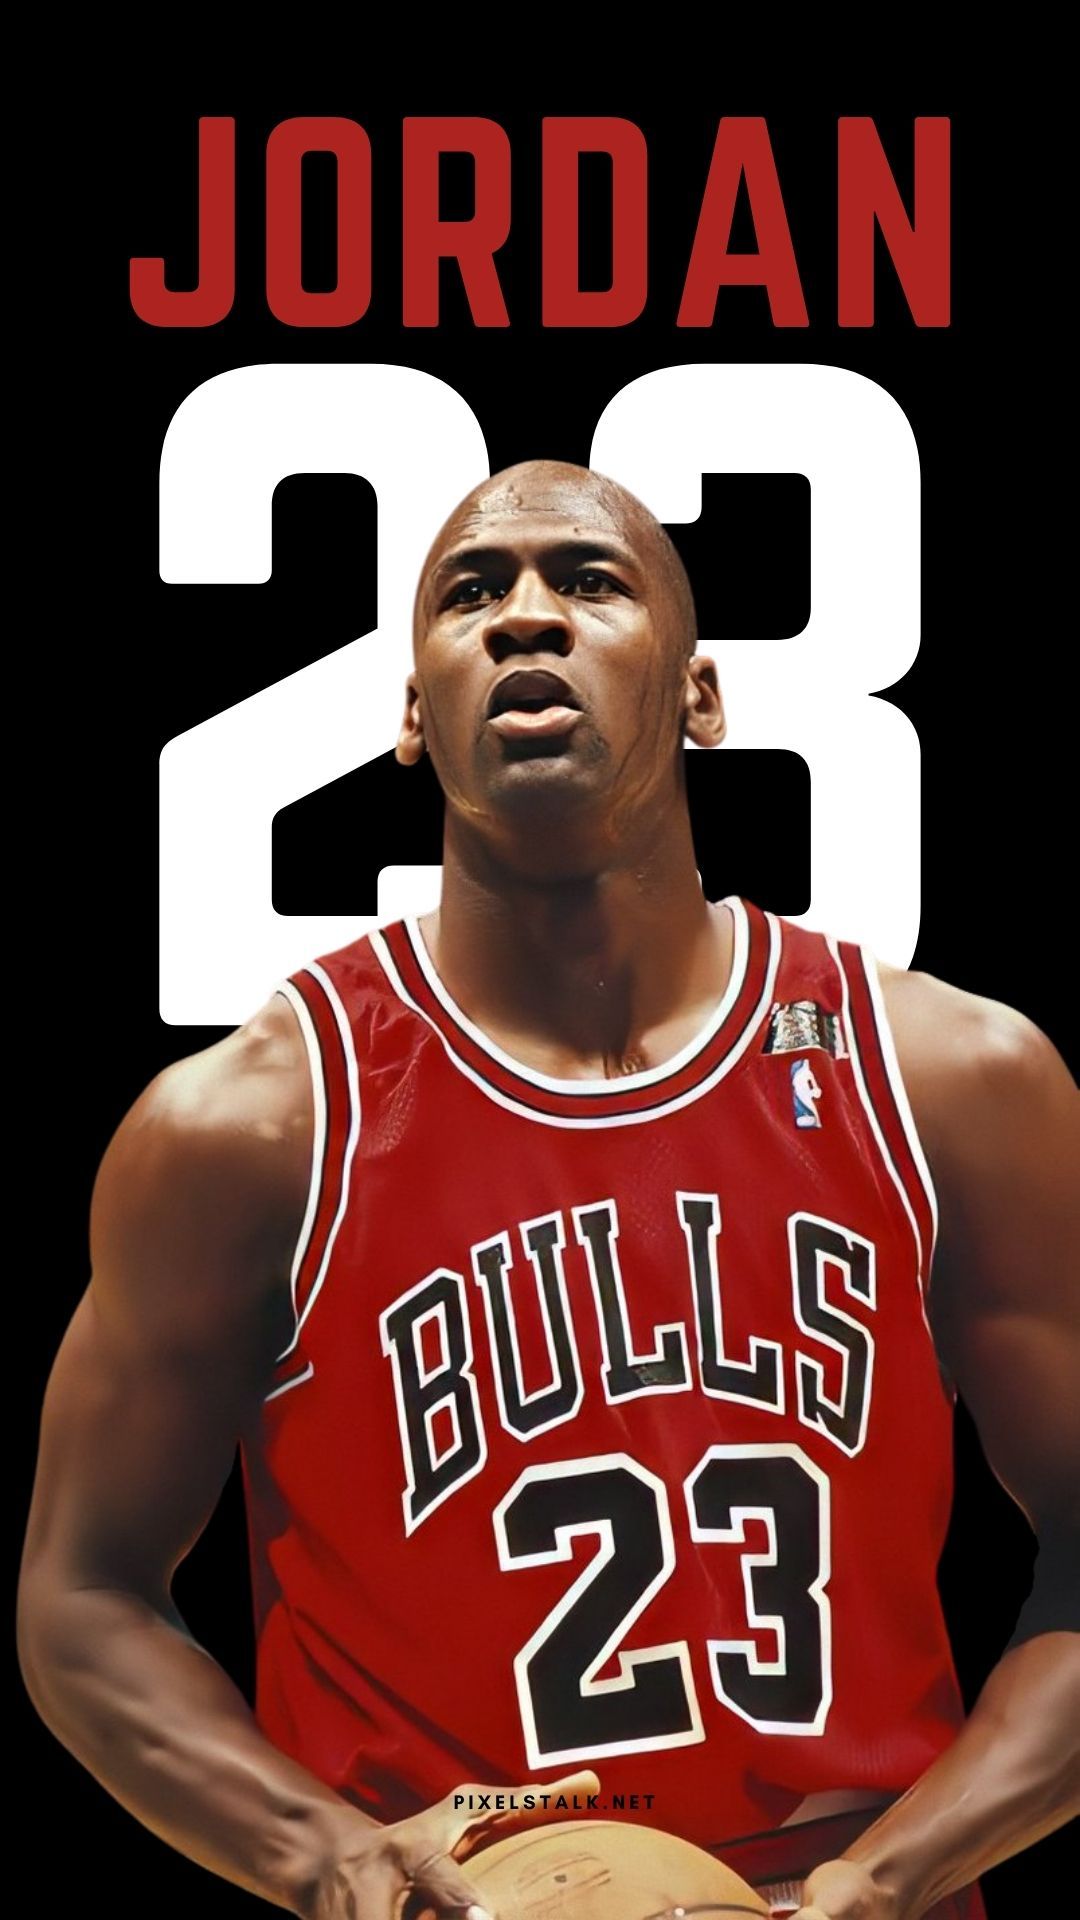 Michael Jordan 23 Bulls iPhone Wallpaper with high-resolution 1080x1920 pixel. You can use this wallpaper for your iPhone 5, 6, 7, 8, X, XS, XR backgrounds, Mobile Screensaver, or iPad Lock Screen - Michael Jordan